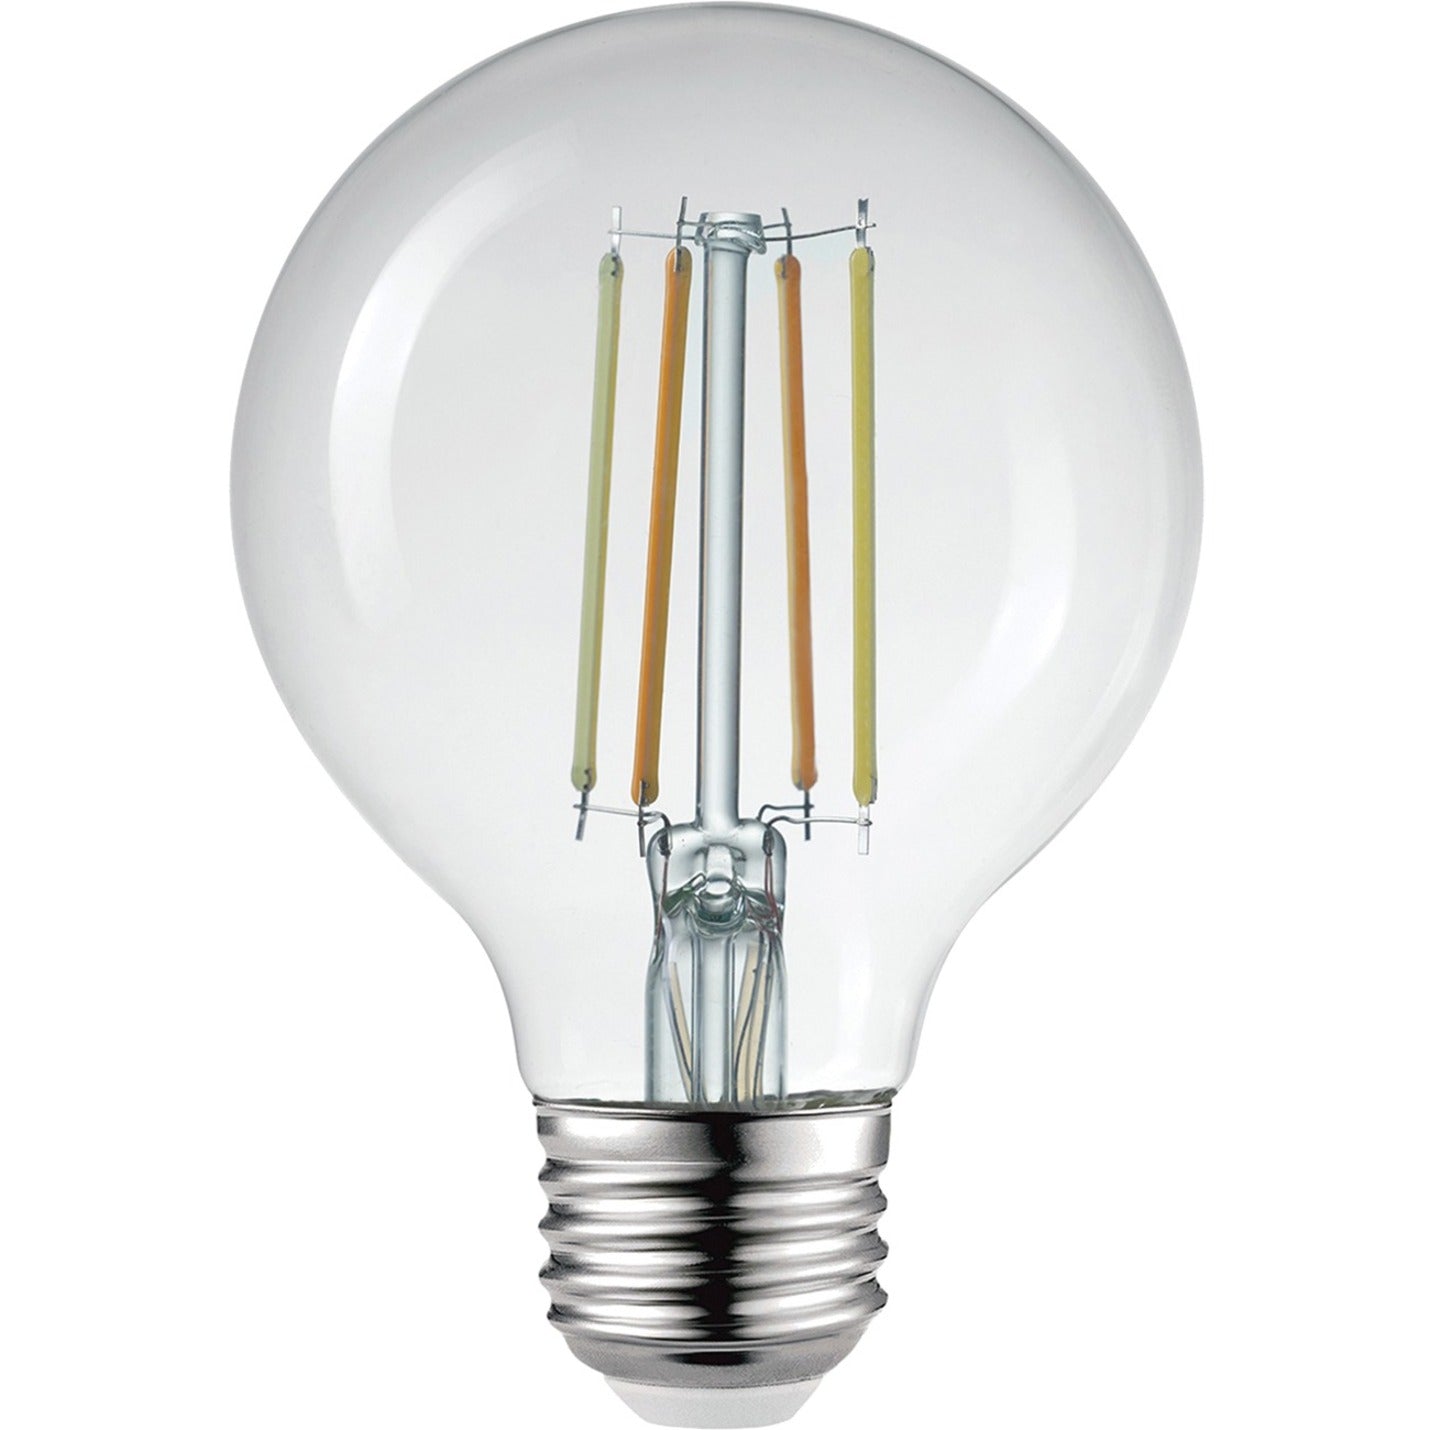 Globe Electric 34920 LED Light Bulb, Dimmable, Adjustable Light Color, Wi-Fi, Voice Control